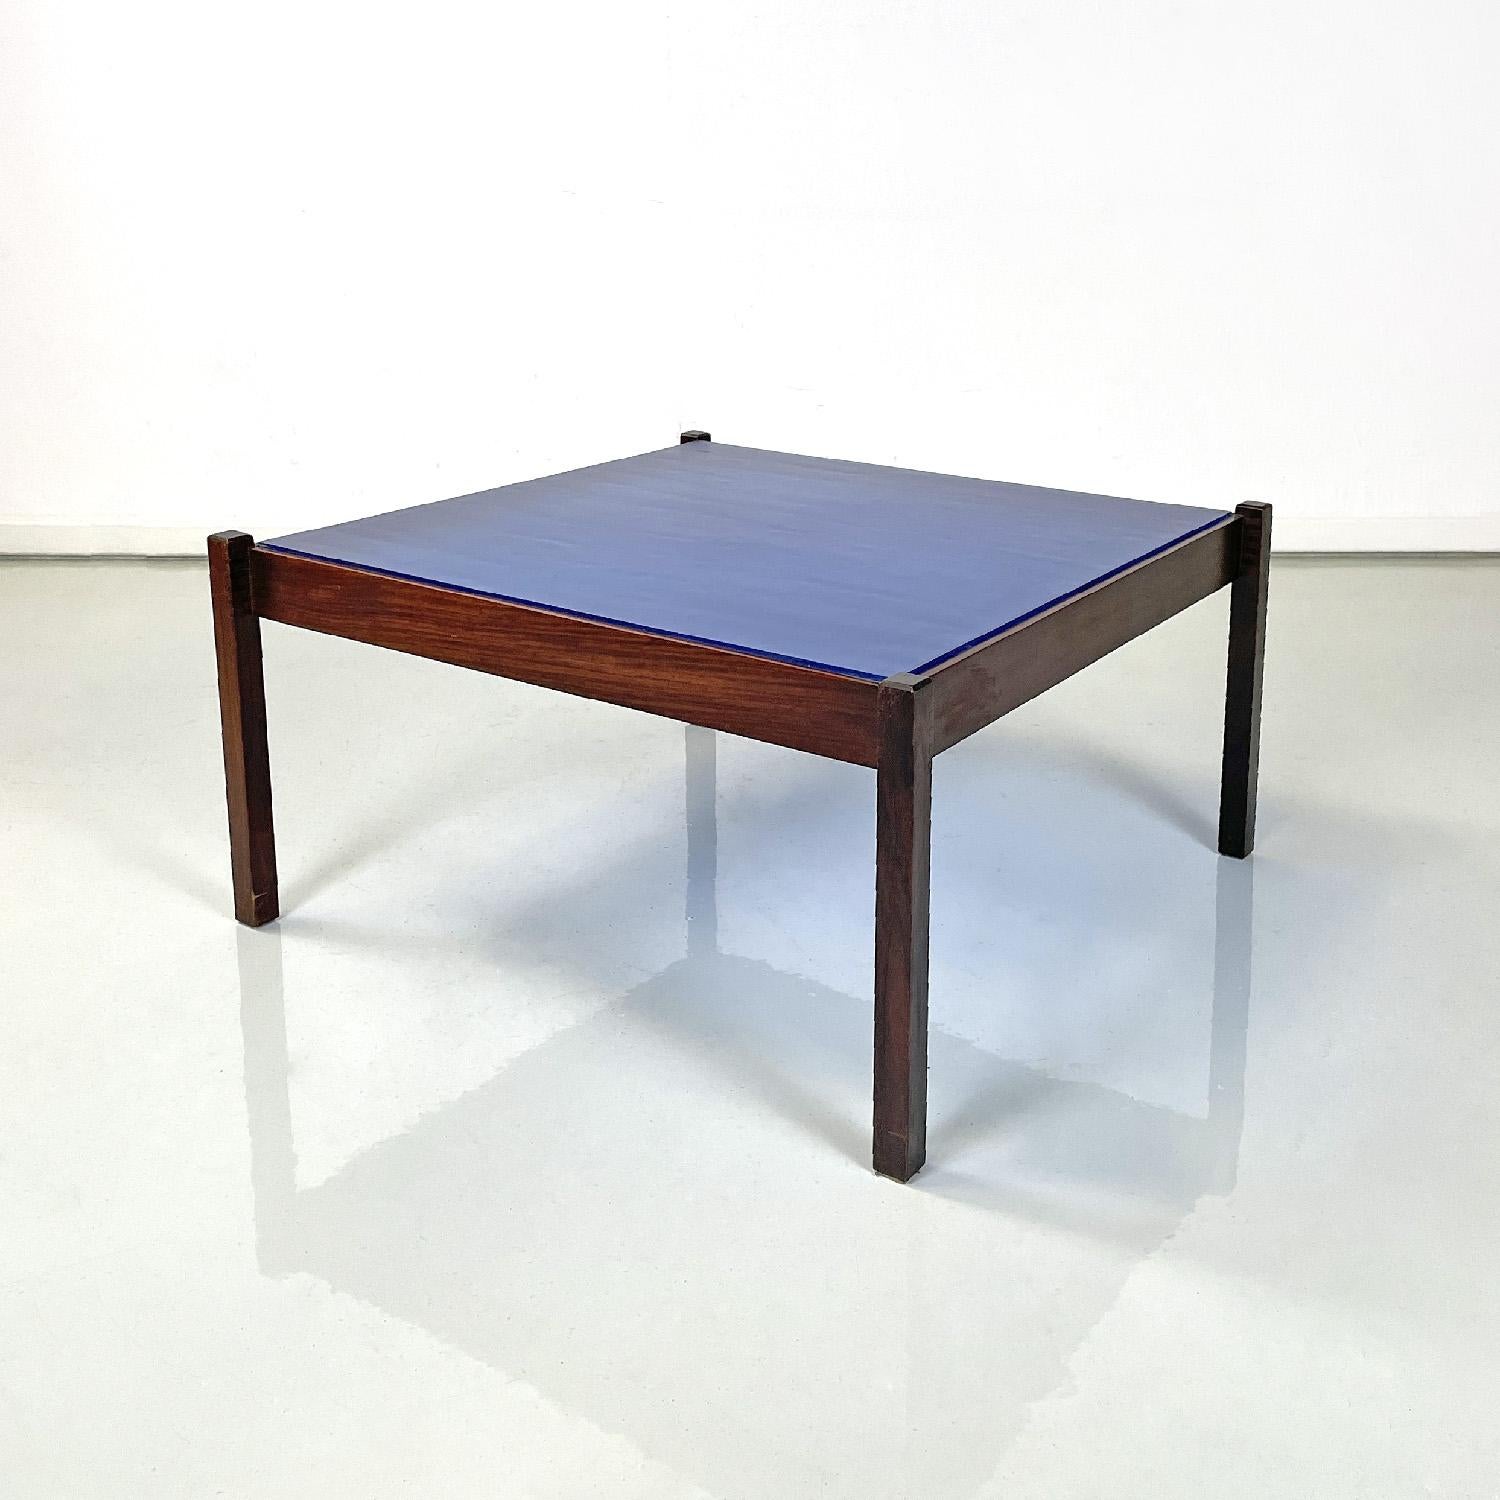 Italian mid-century modern coffee table by Gianfranco Frattini for Bernini 1960s
Rectangular coffee table. The top is made of an intense blue glass sheet with a raised striped texture. The structure is made of wood, has four legs with a square